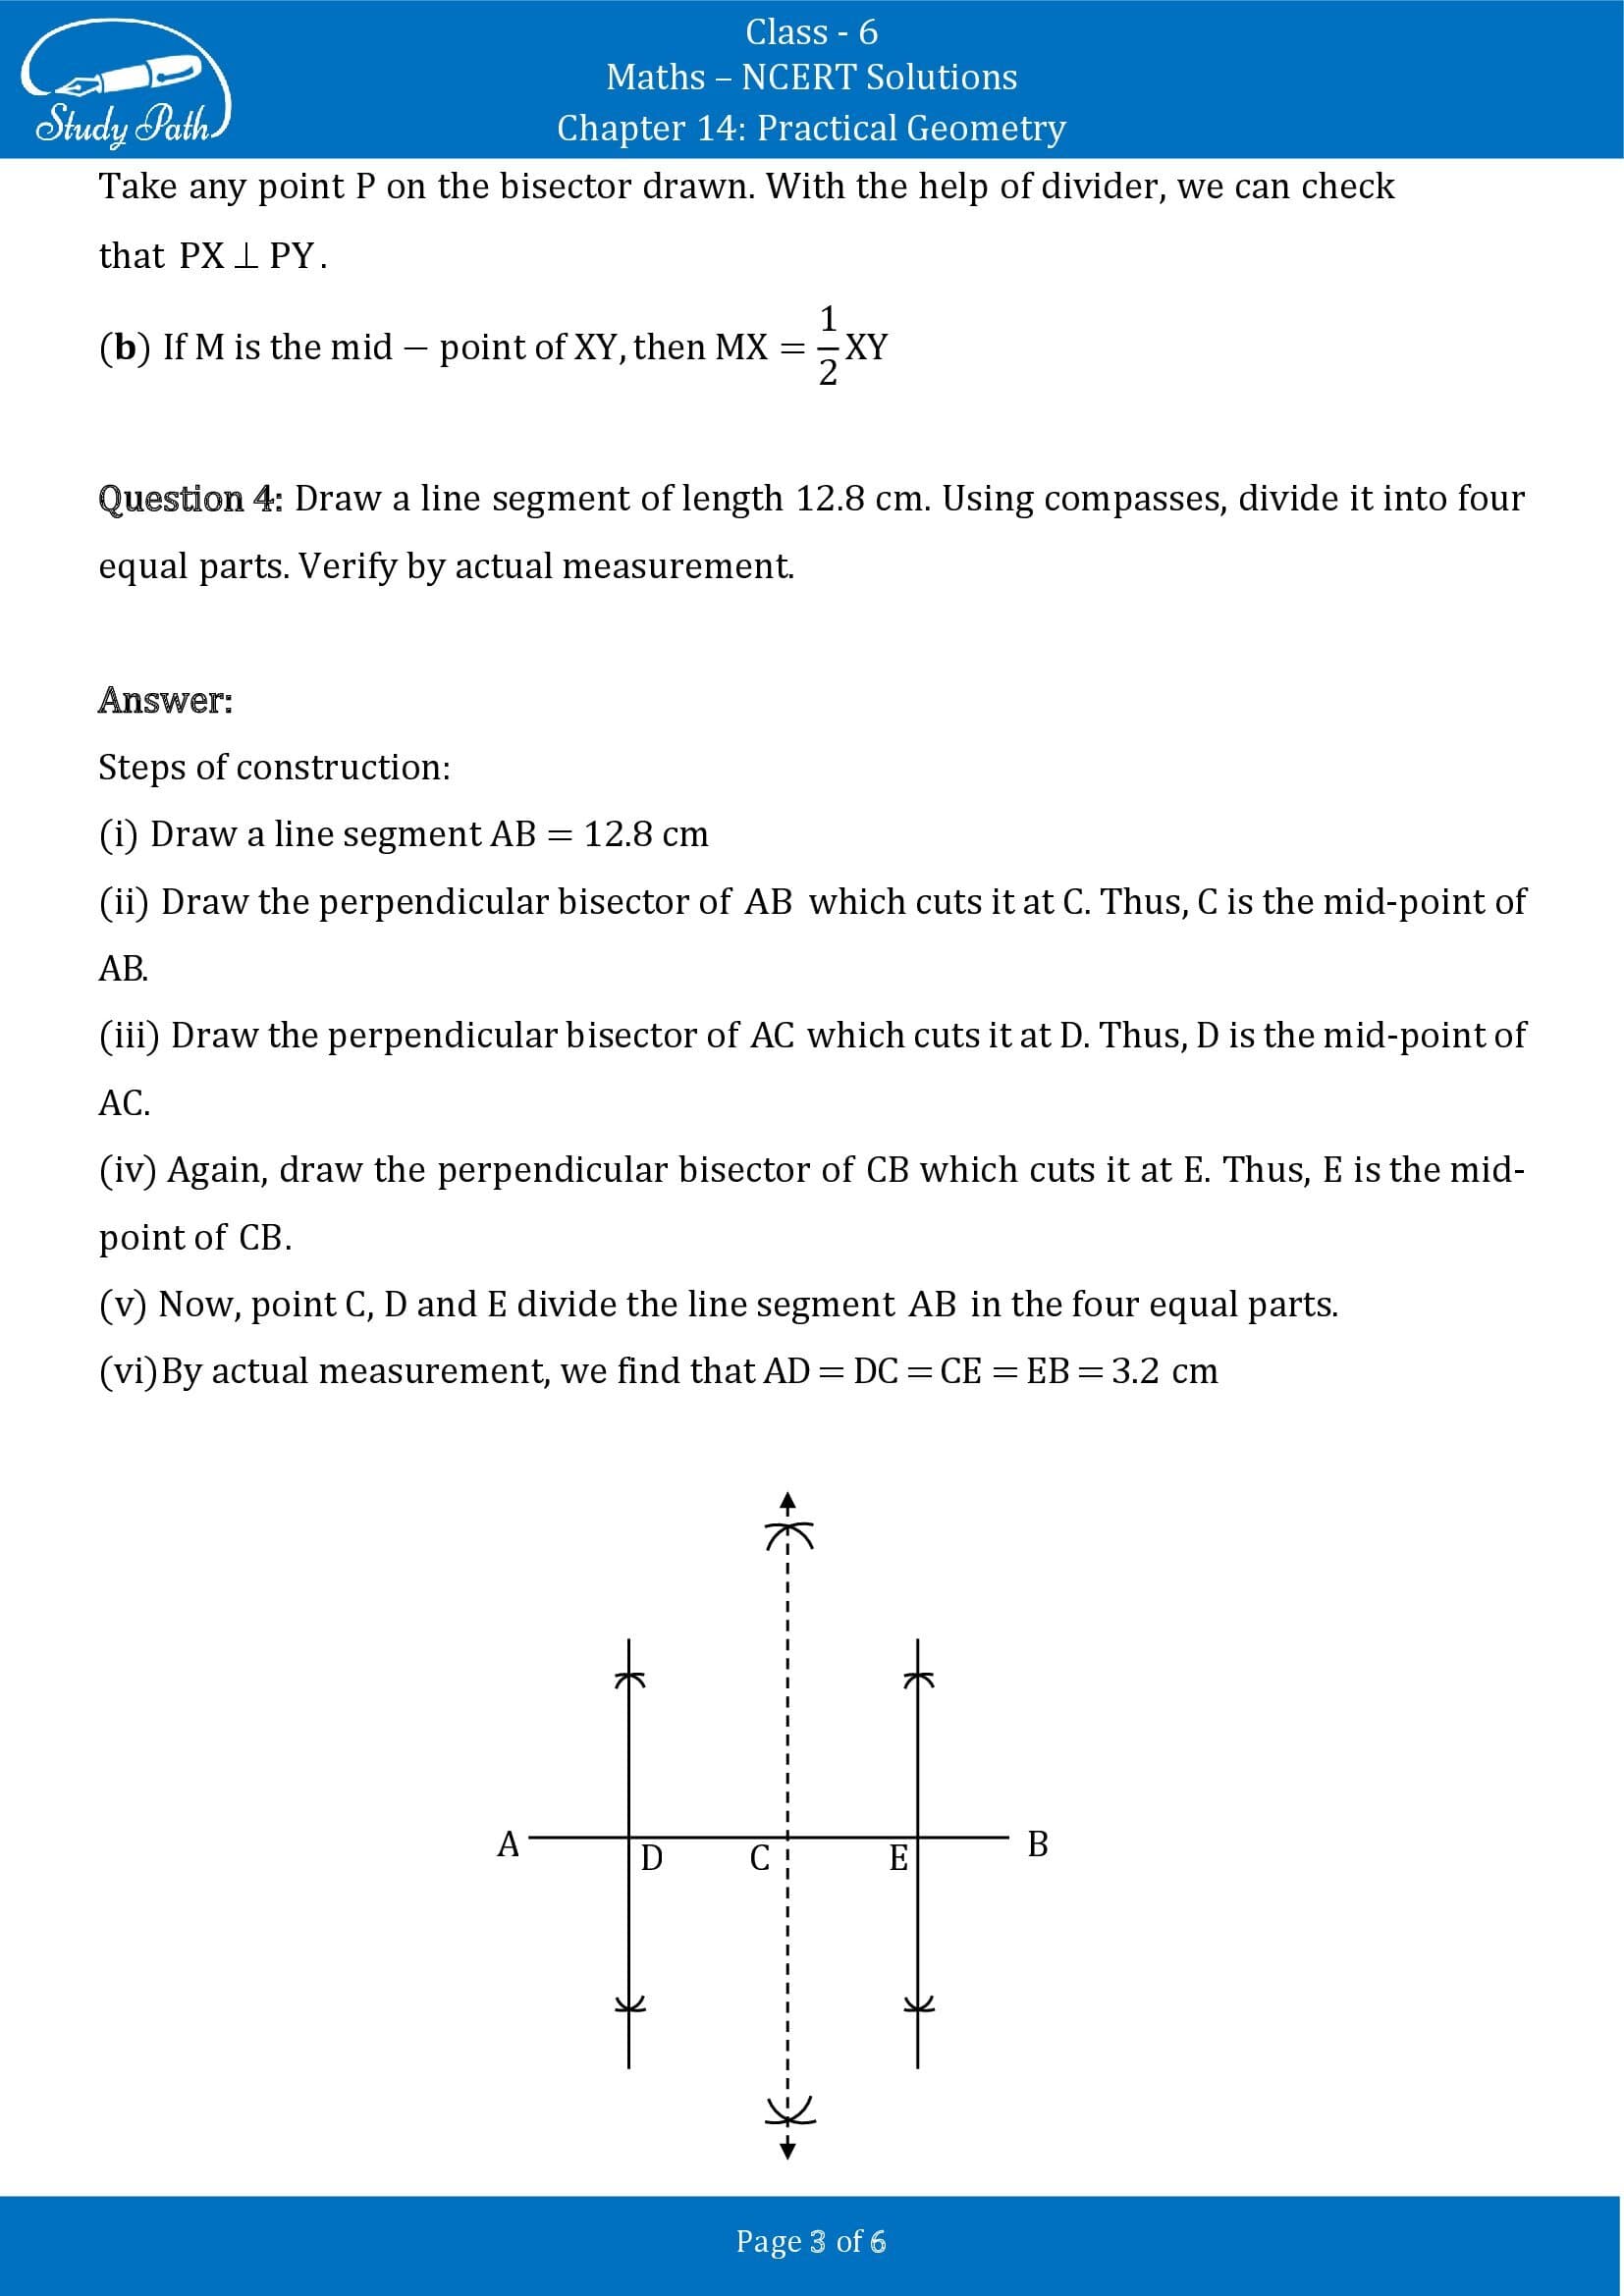 NCERT Solutions for Class 6 Maths Chapter 14 Practical Geometry Exercise 14.5 00003